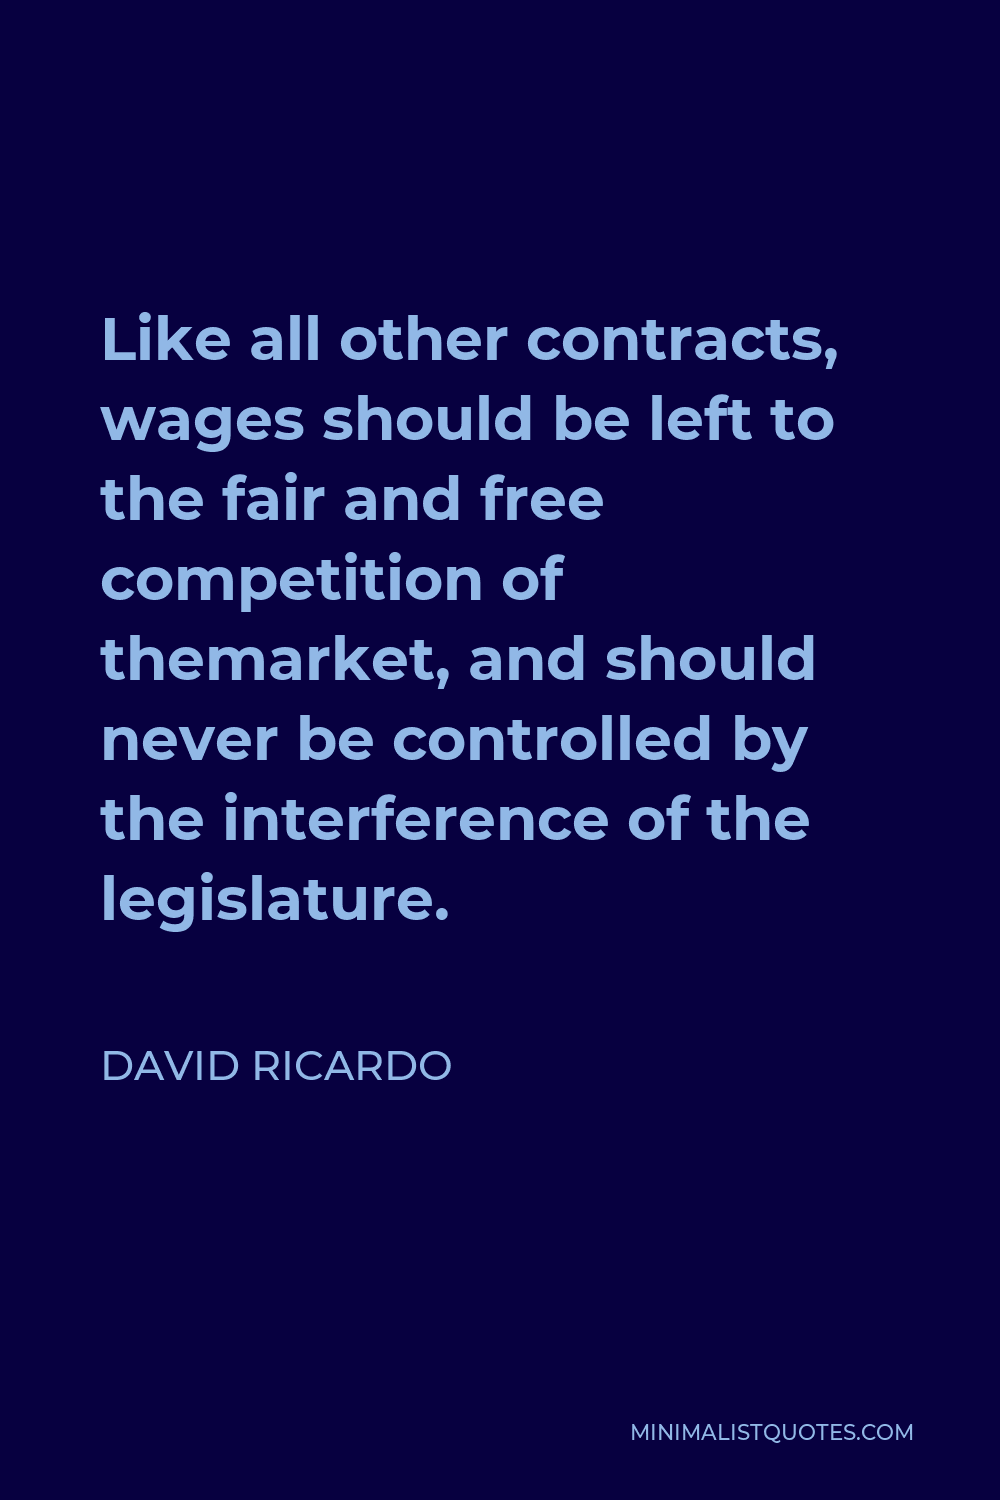 David Ricardo Quote - Like all other contracts, wages should be left to the fair and free competition of themarket, and should never be controlled by the interference of the legislature.